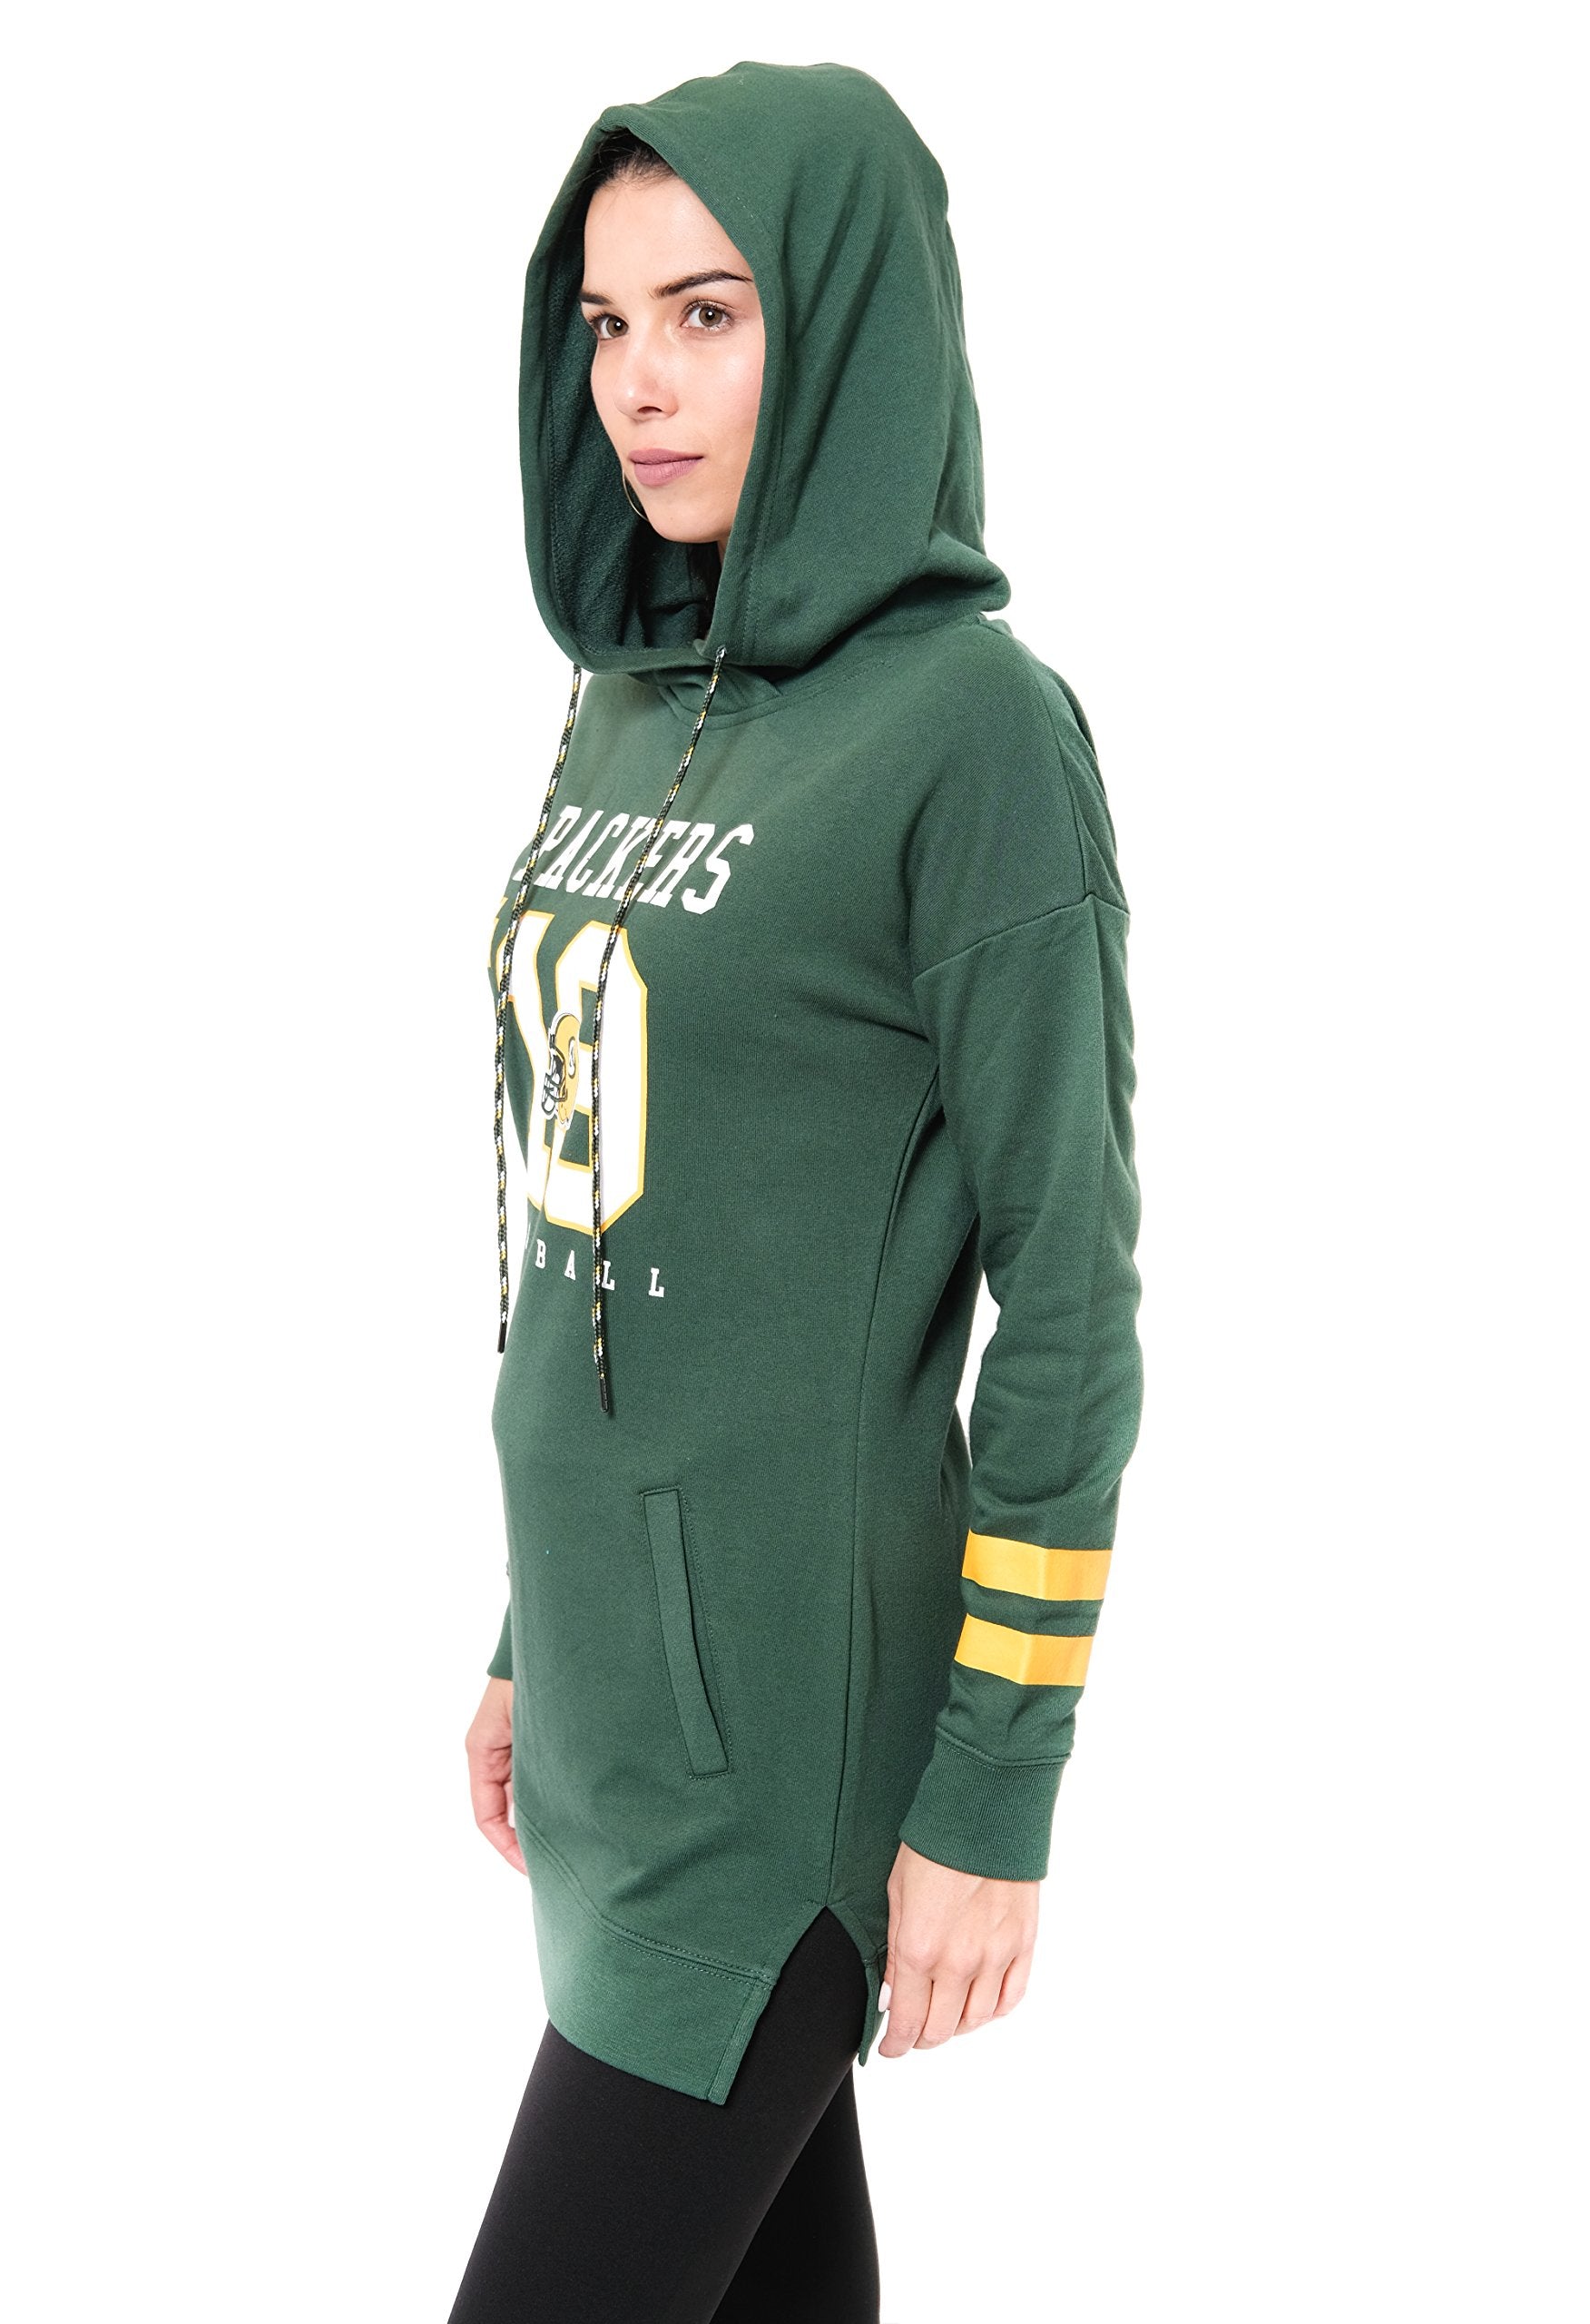 Ultra Game NFL Green Bay Packers Womens Soft French Terry Tunic Hoodie Pullover Sweatshirt|Green Bay Packers